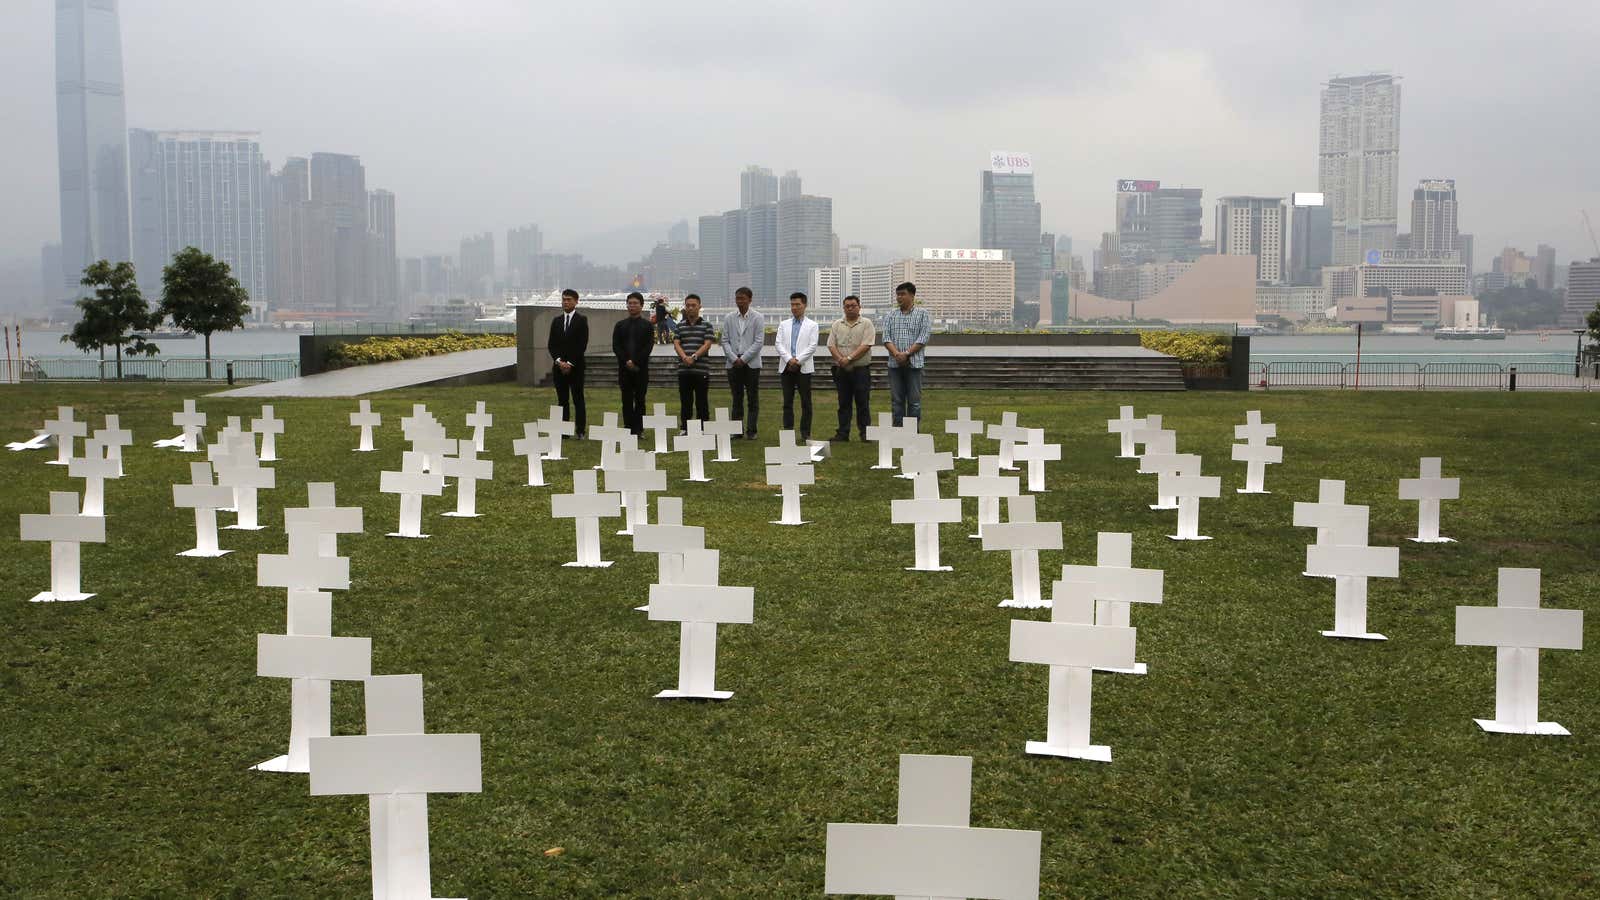 Paper graves set up to protest Zhang Dejiang’s visit mark the deaths of SARS victims in Hong Kong.